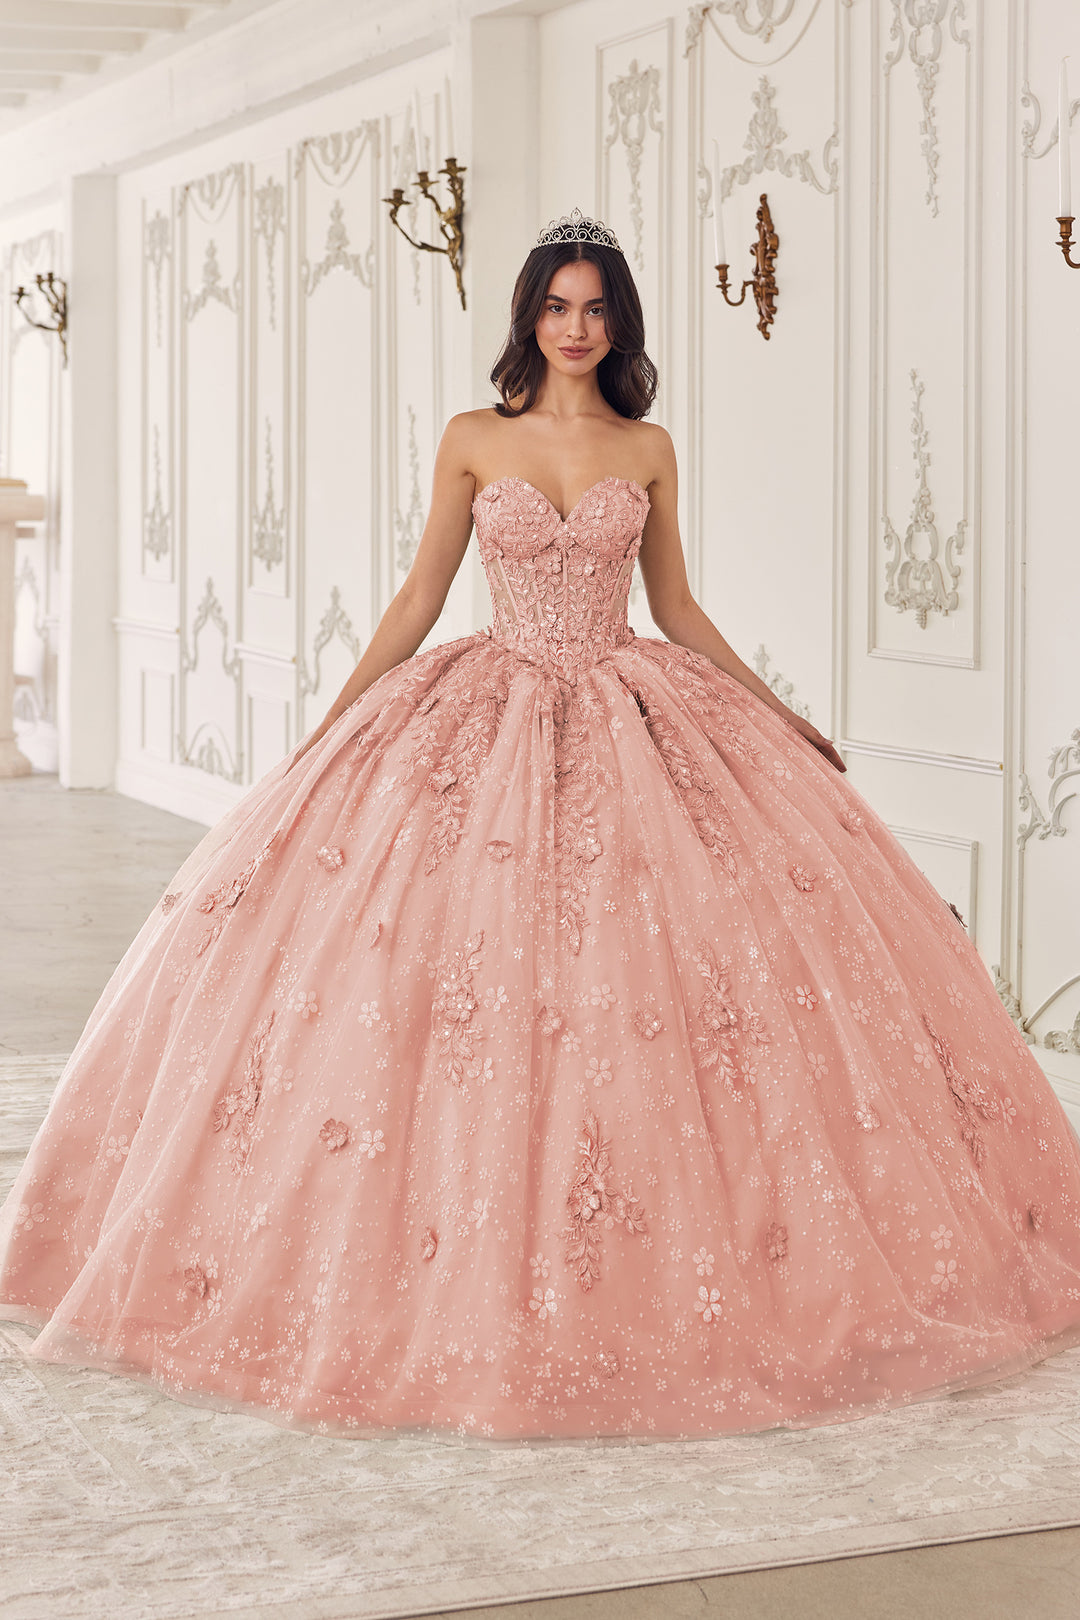 Applique Strapless Puff Sleeve Ball Gown by Ladivine 15722